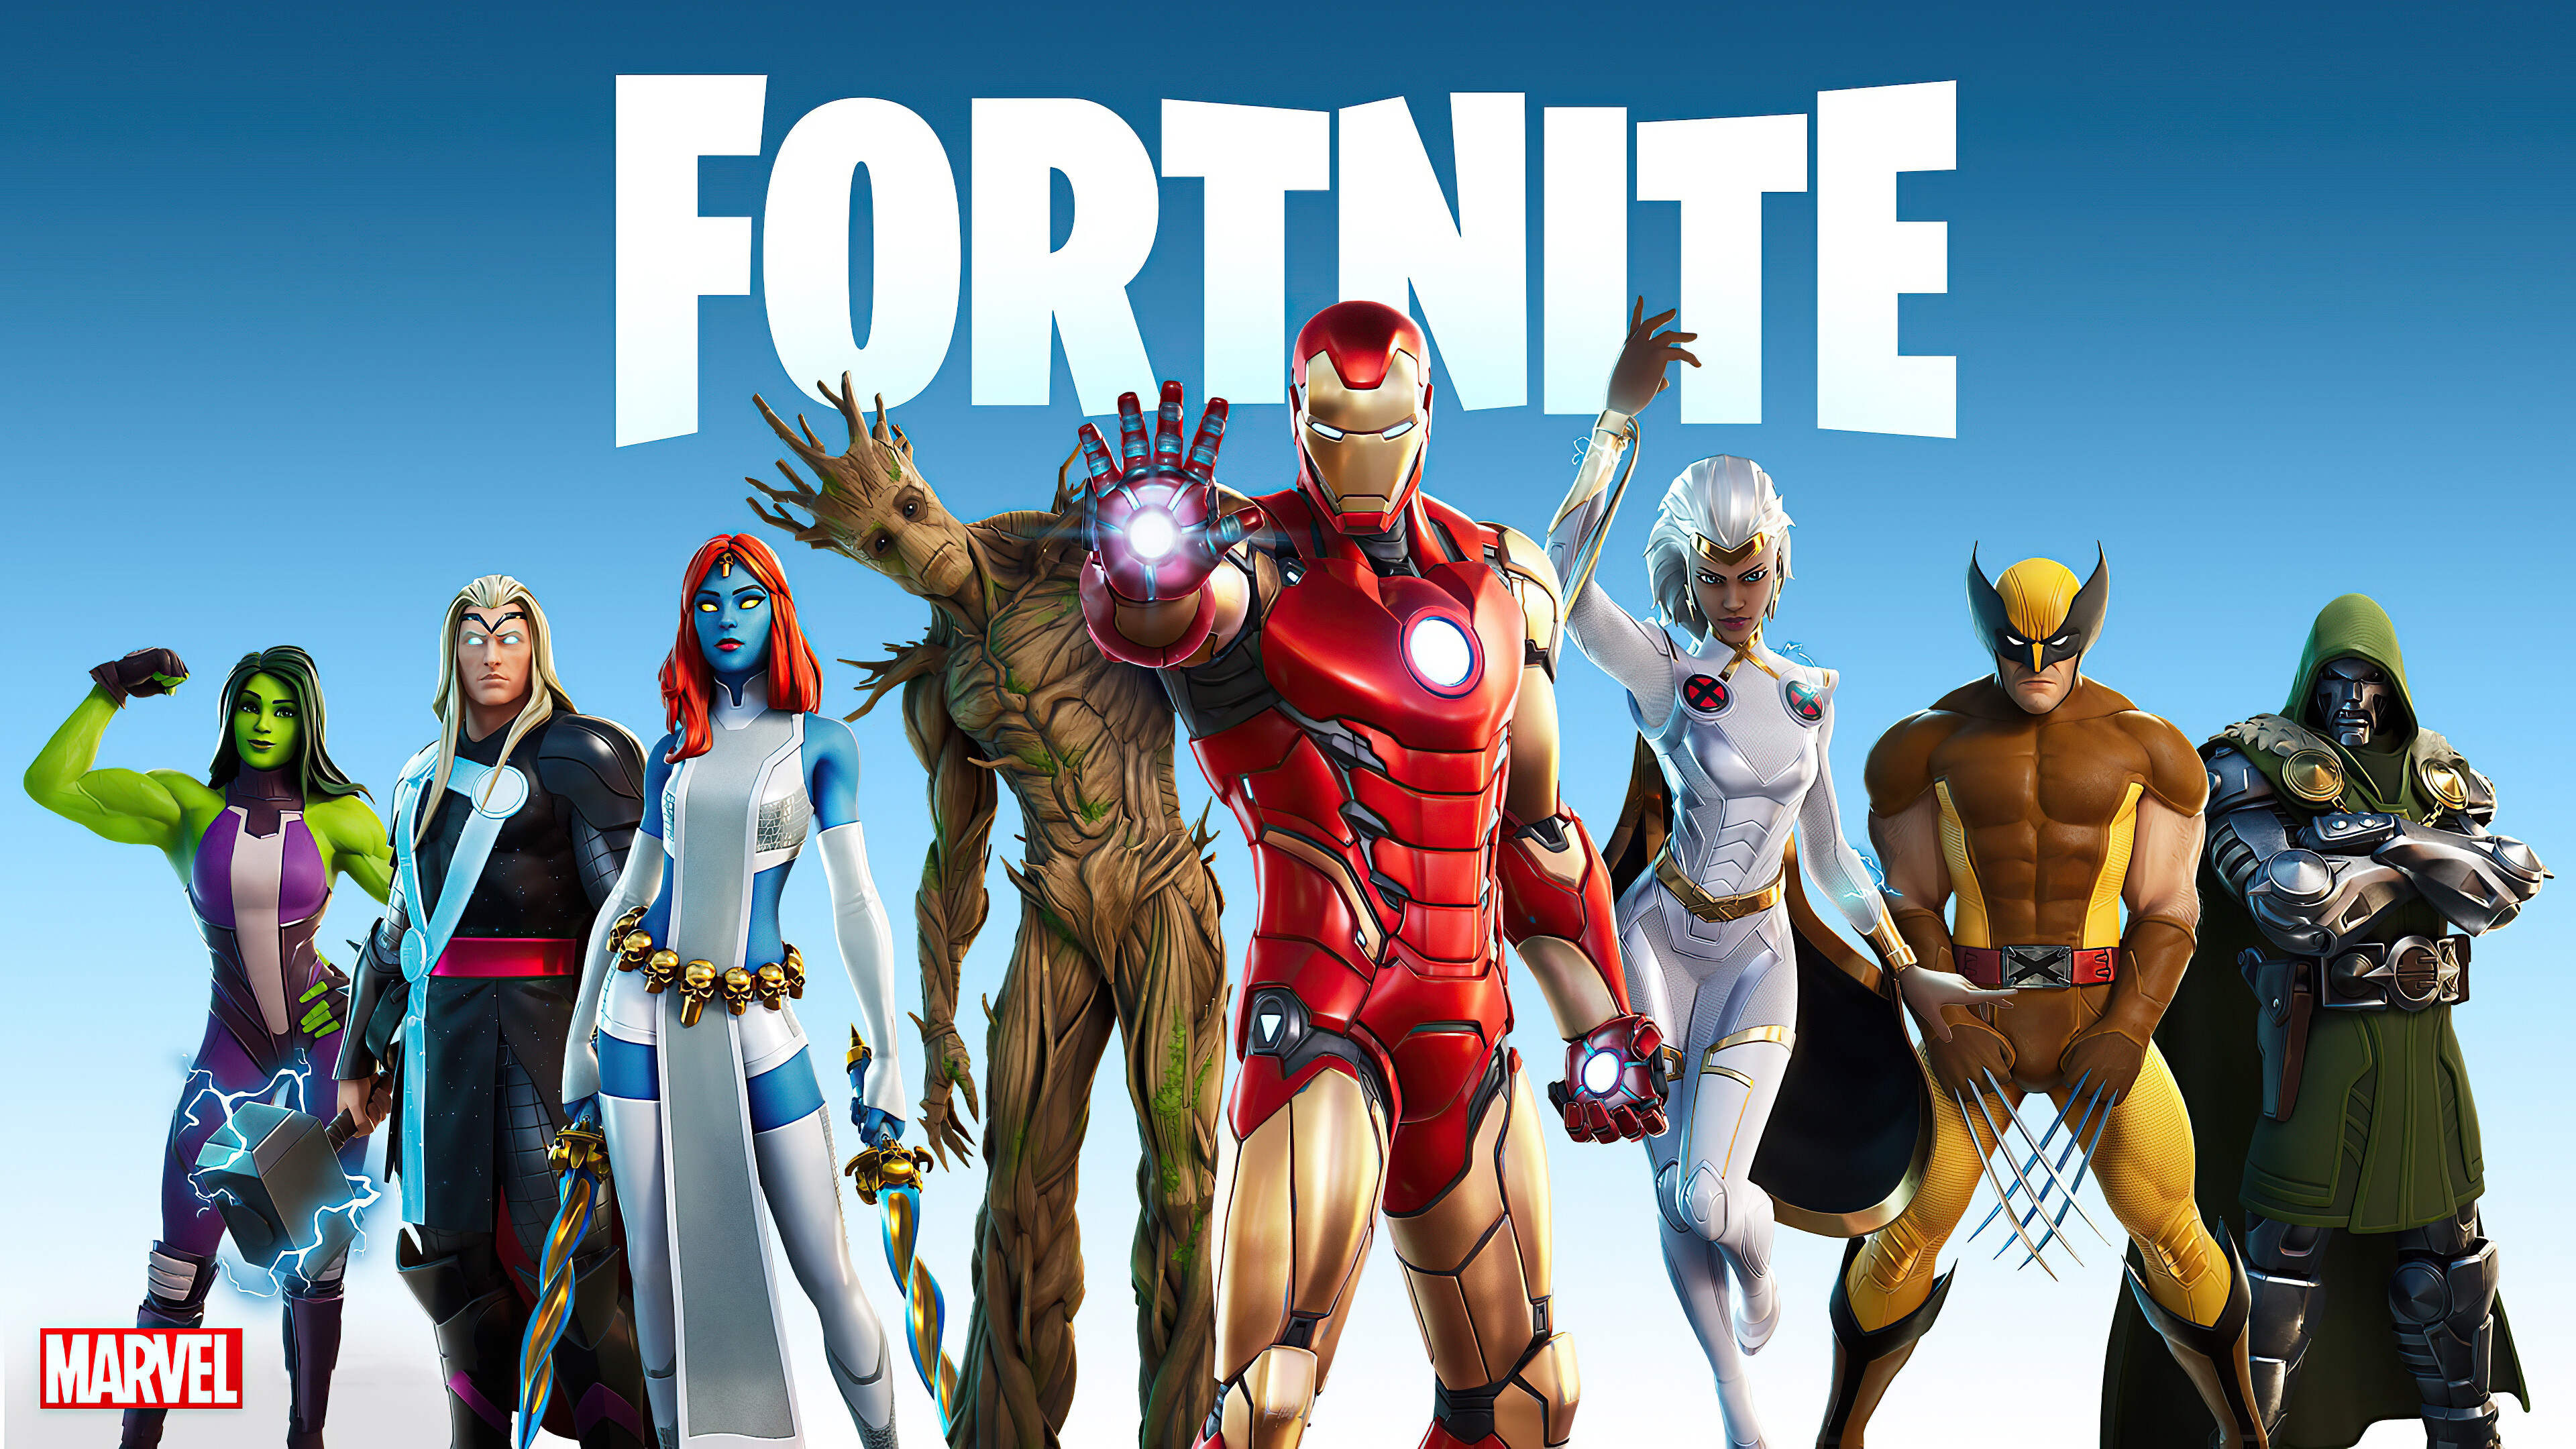 Fortnite: In Season 4, players can enjoy an avalanche of superhero items and costumes from both Marvel and DC heroes. 3840x2160 4K Wallpaper.